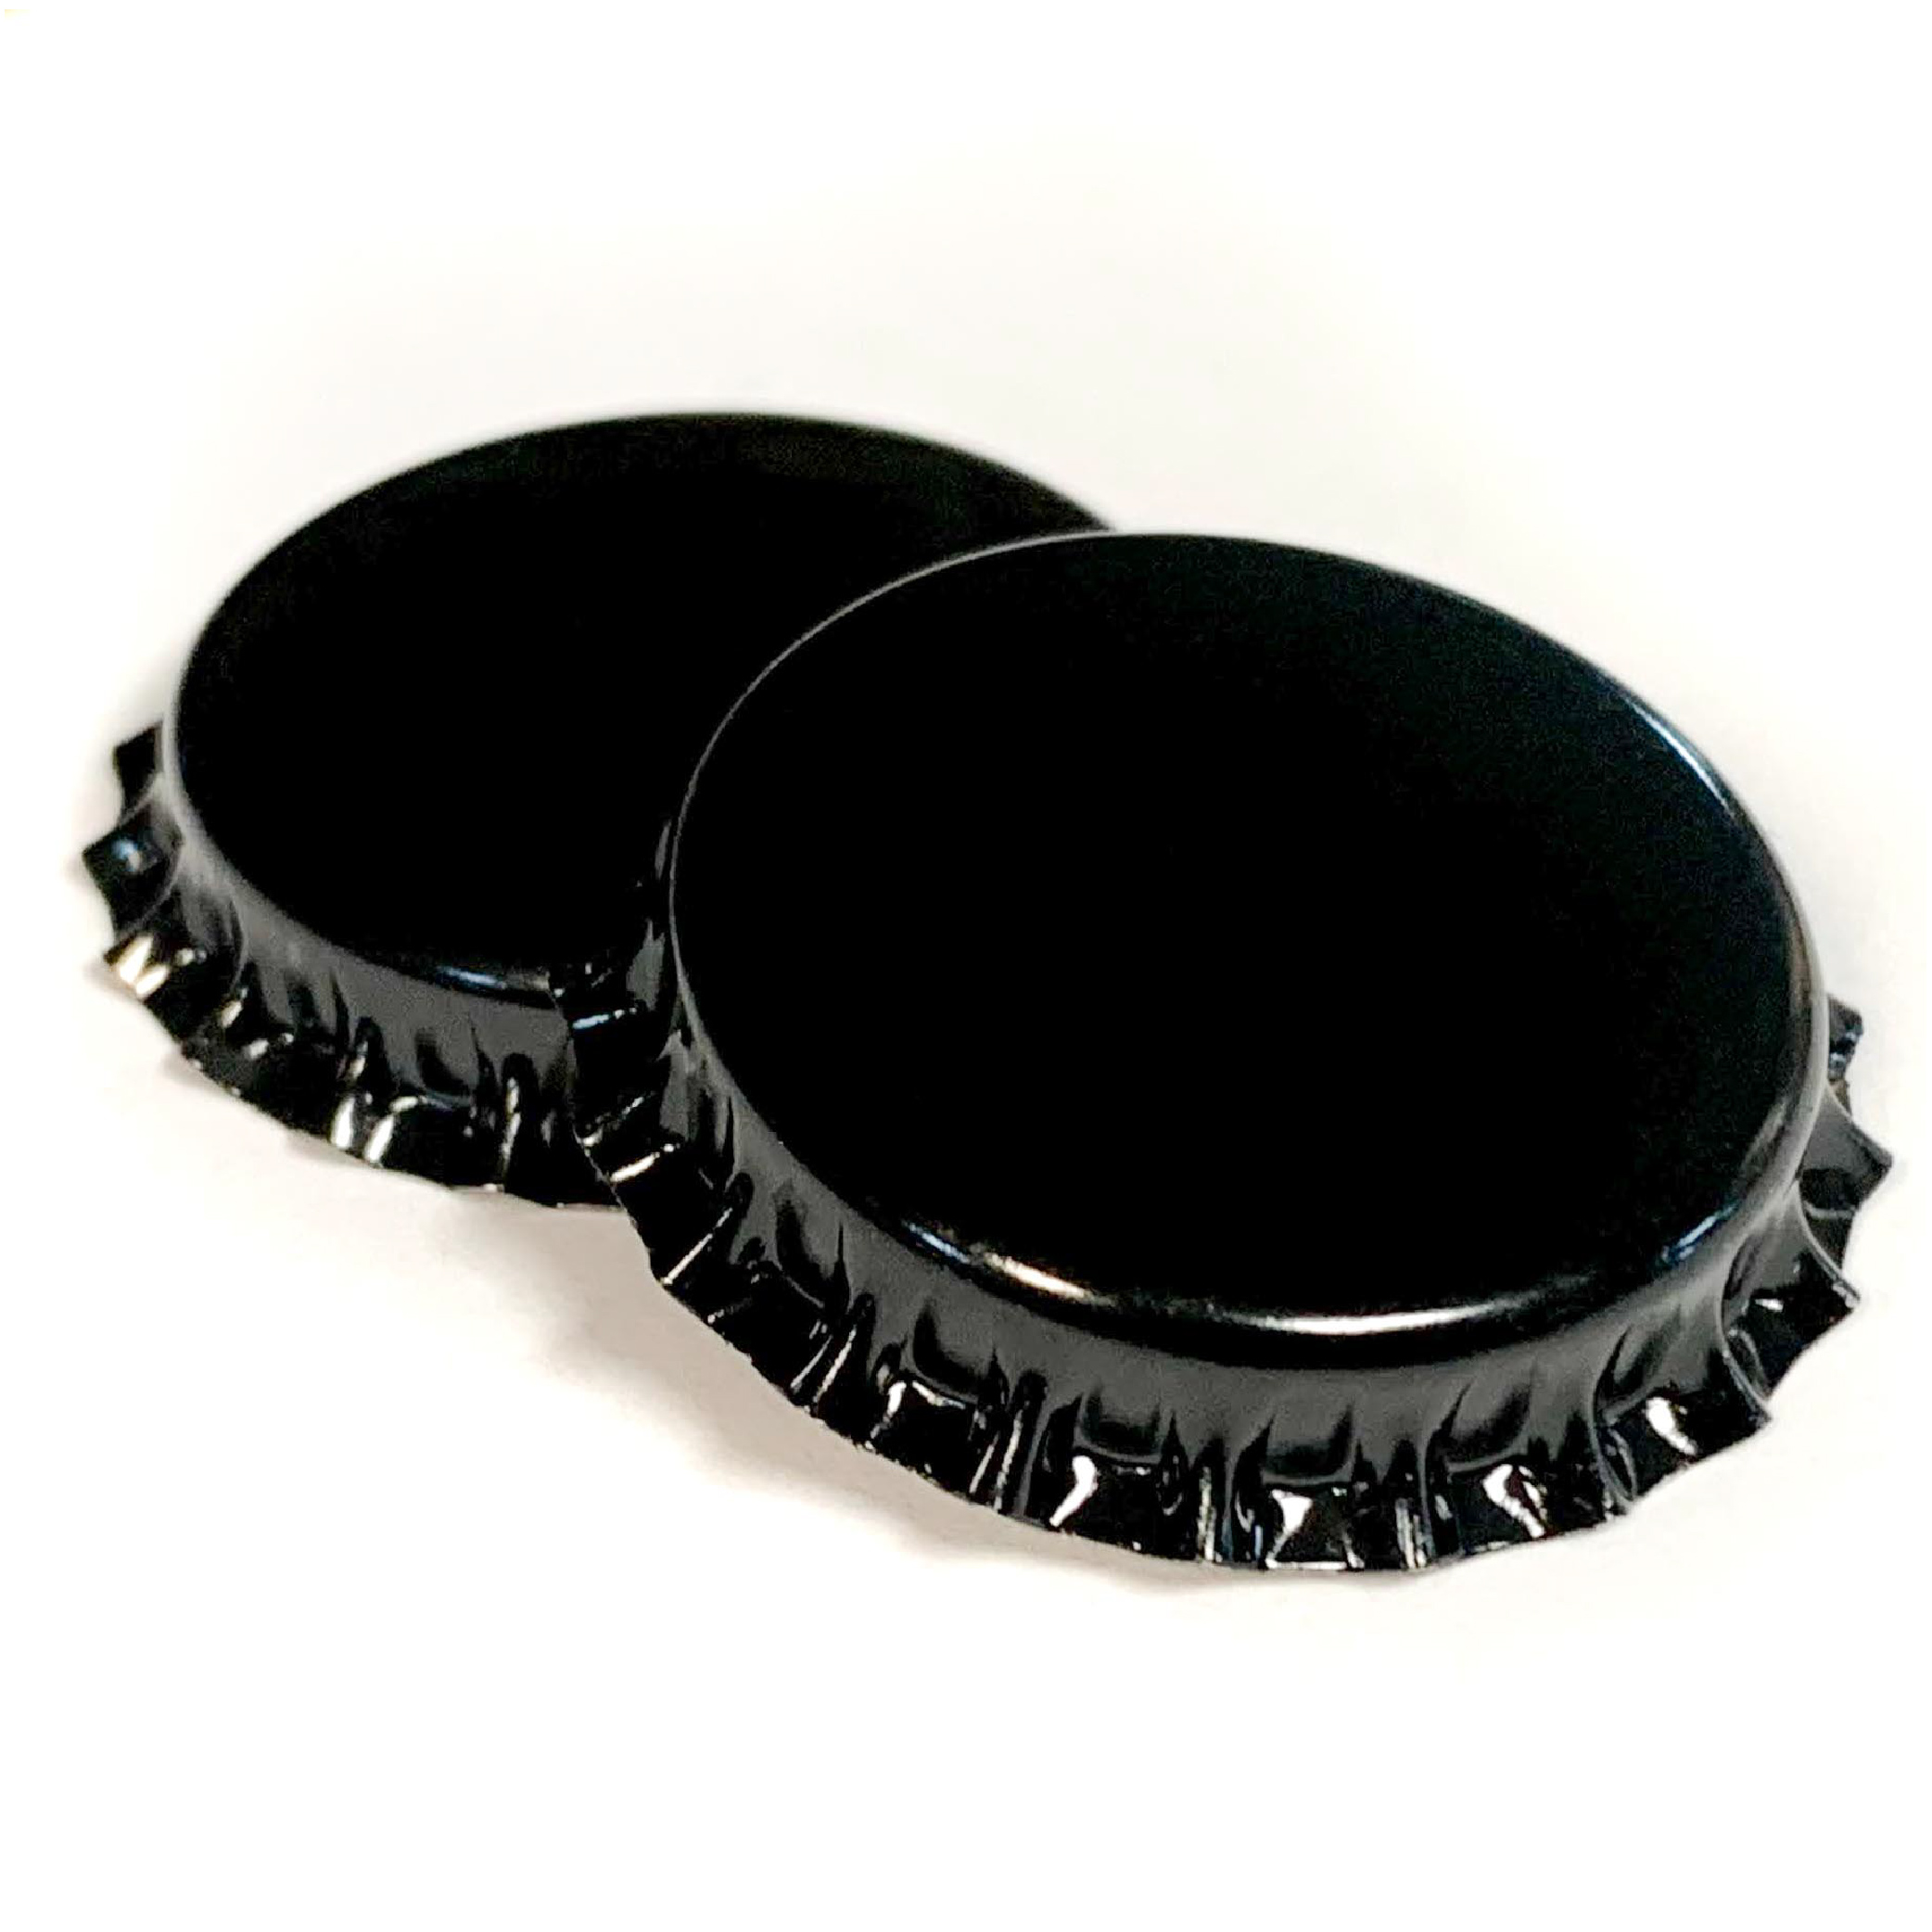 Product image for Black Crown Caps (10,000)